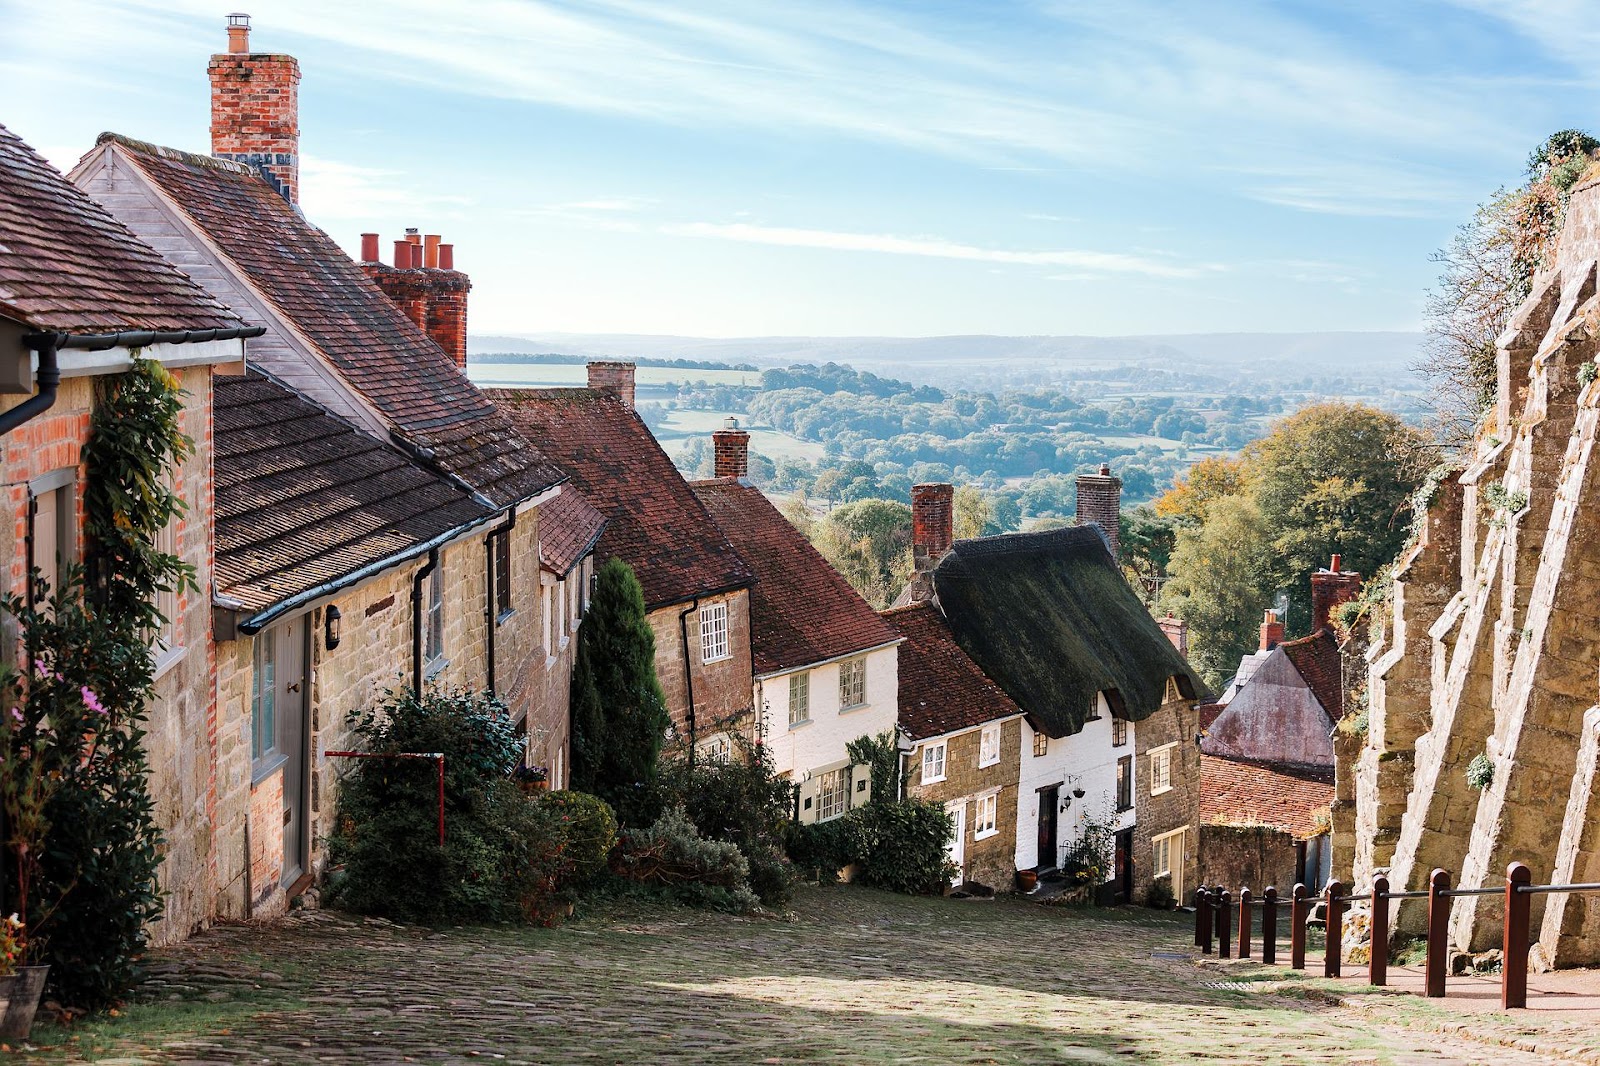 Cobbled village road in England with houses